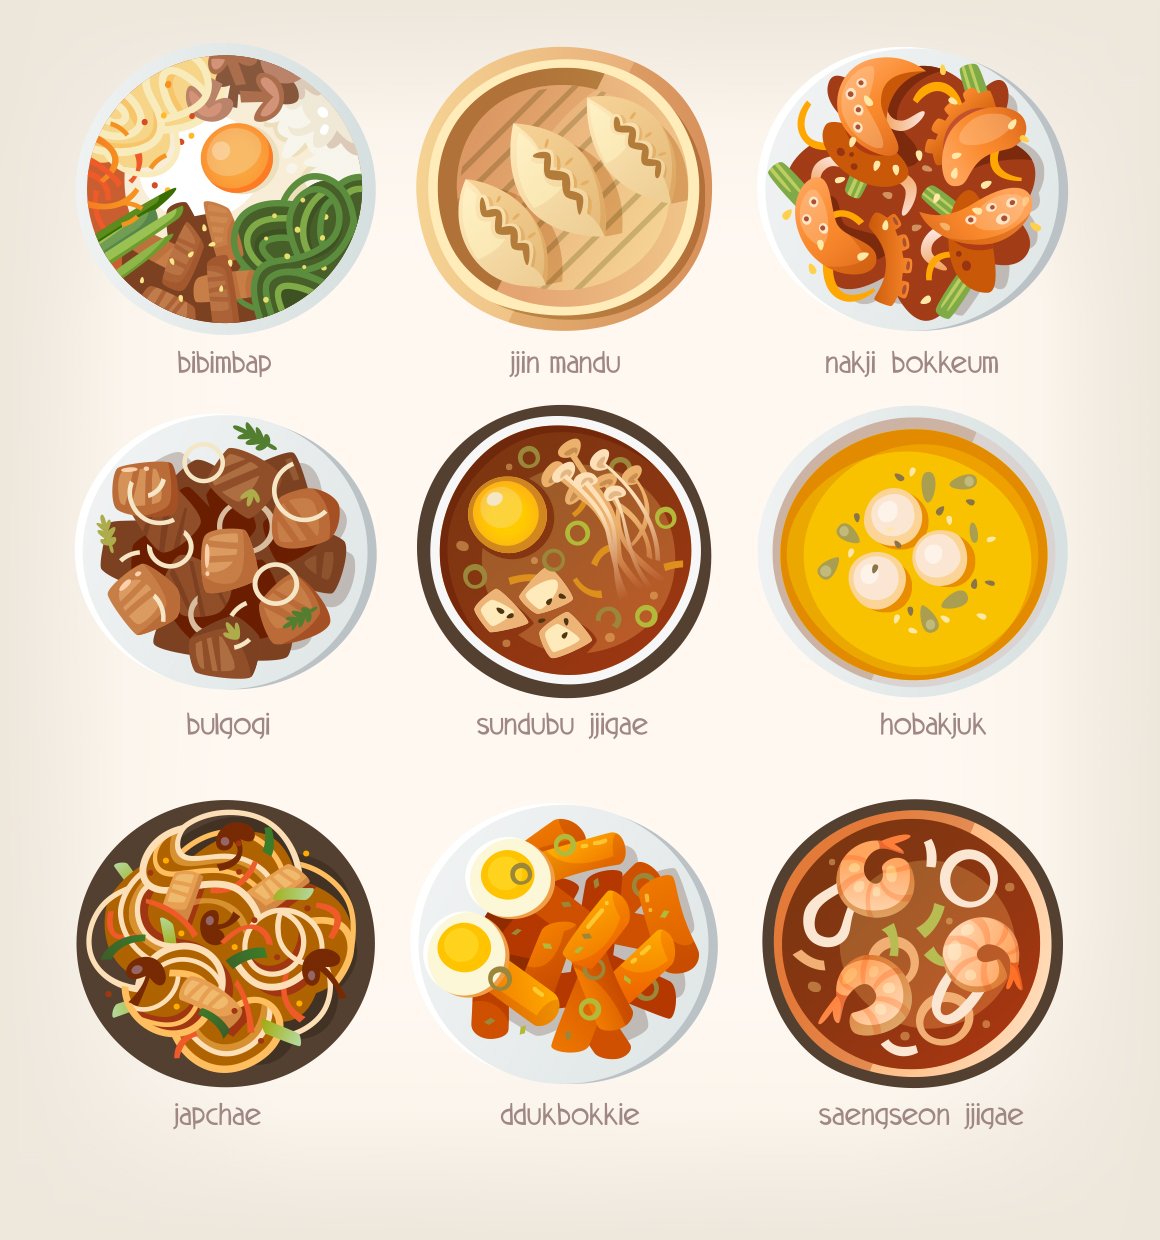 The most popular korean dishes.